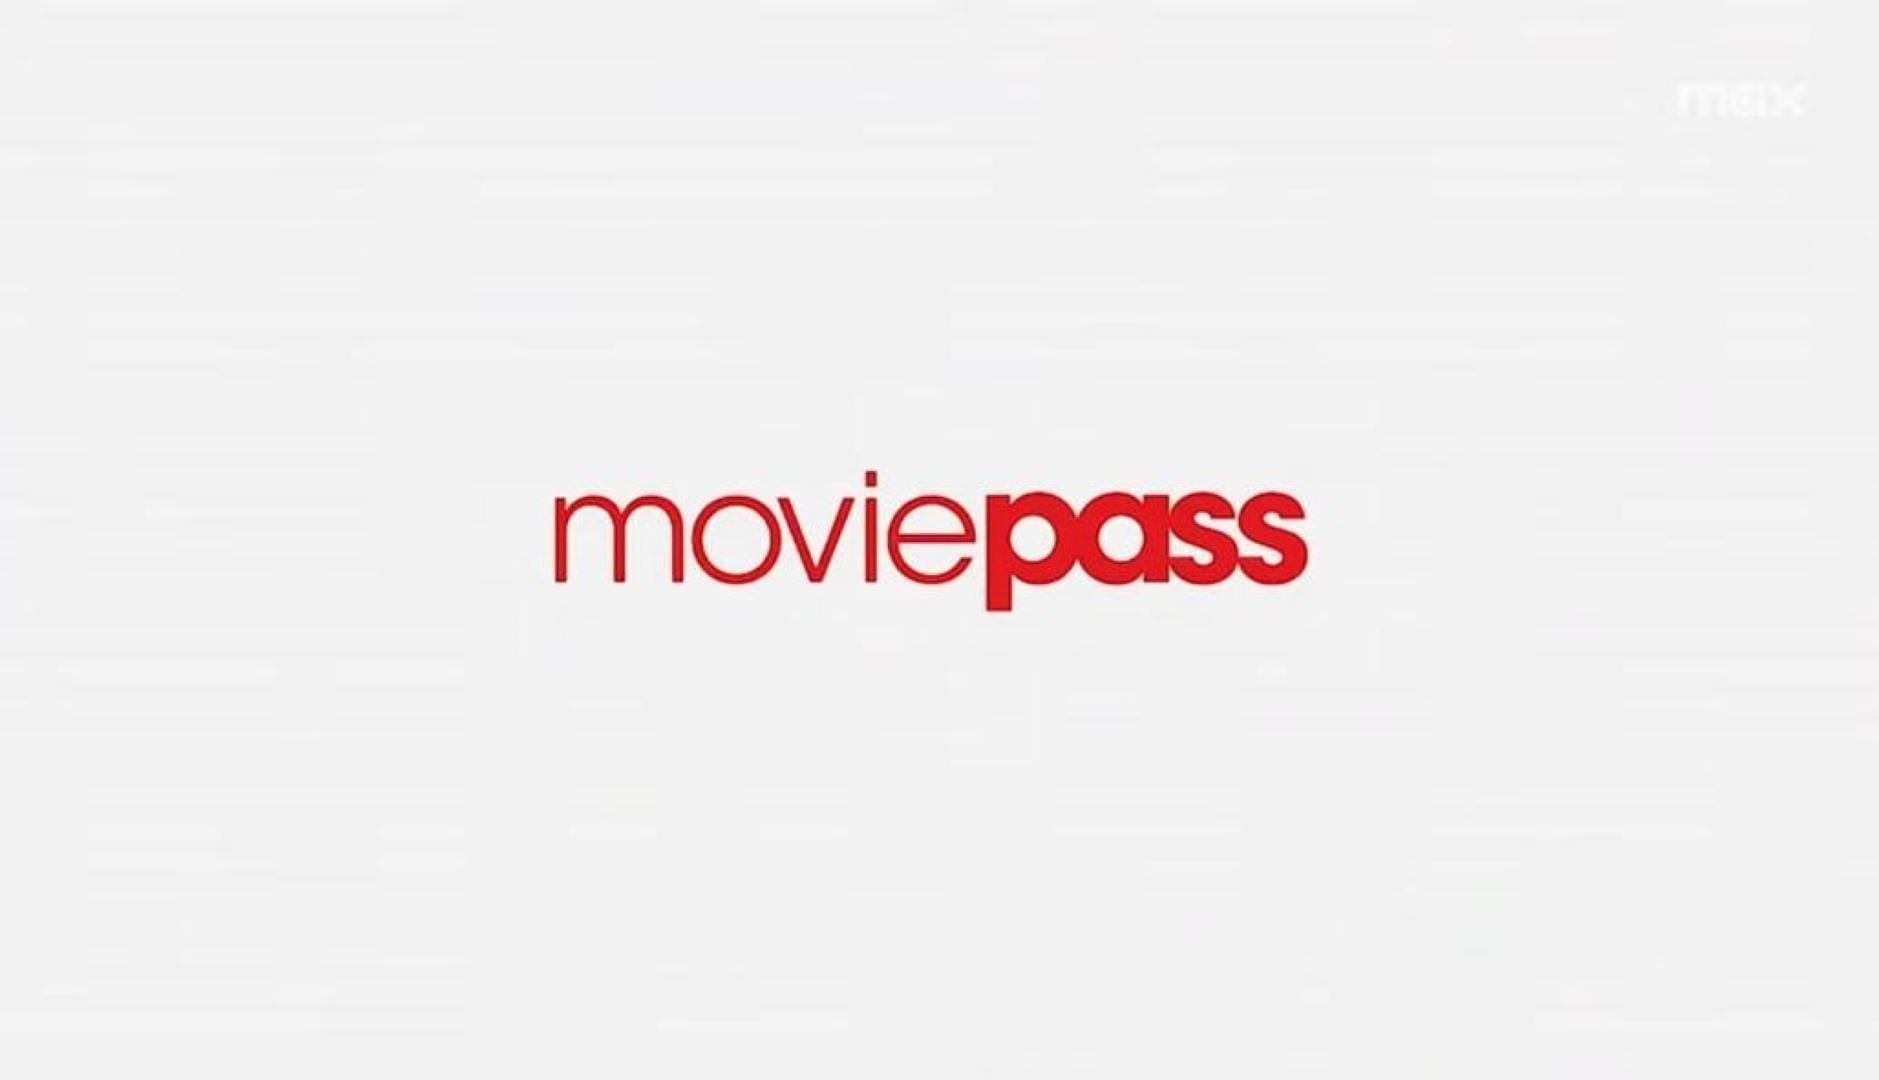 What was MoviePass? (Image by HBO)